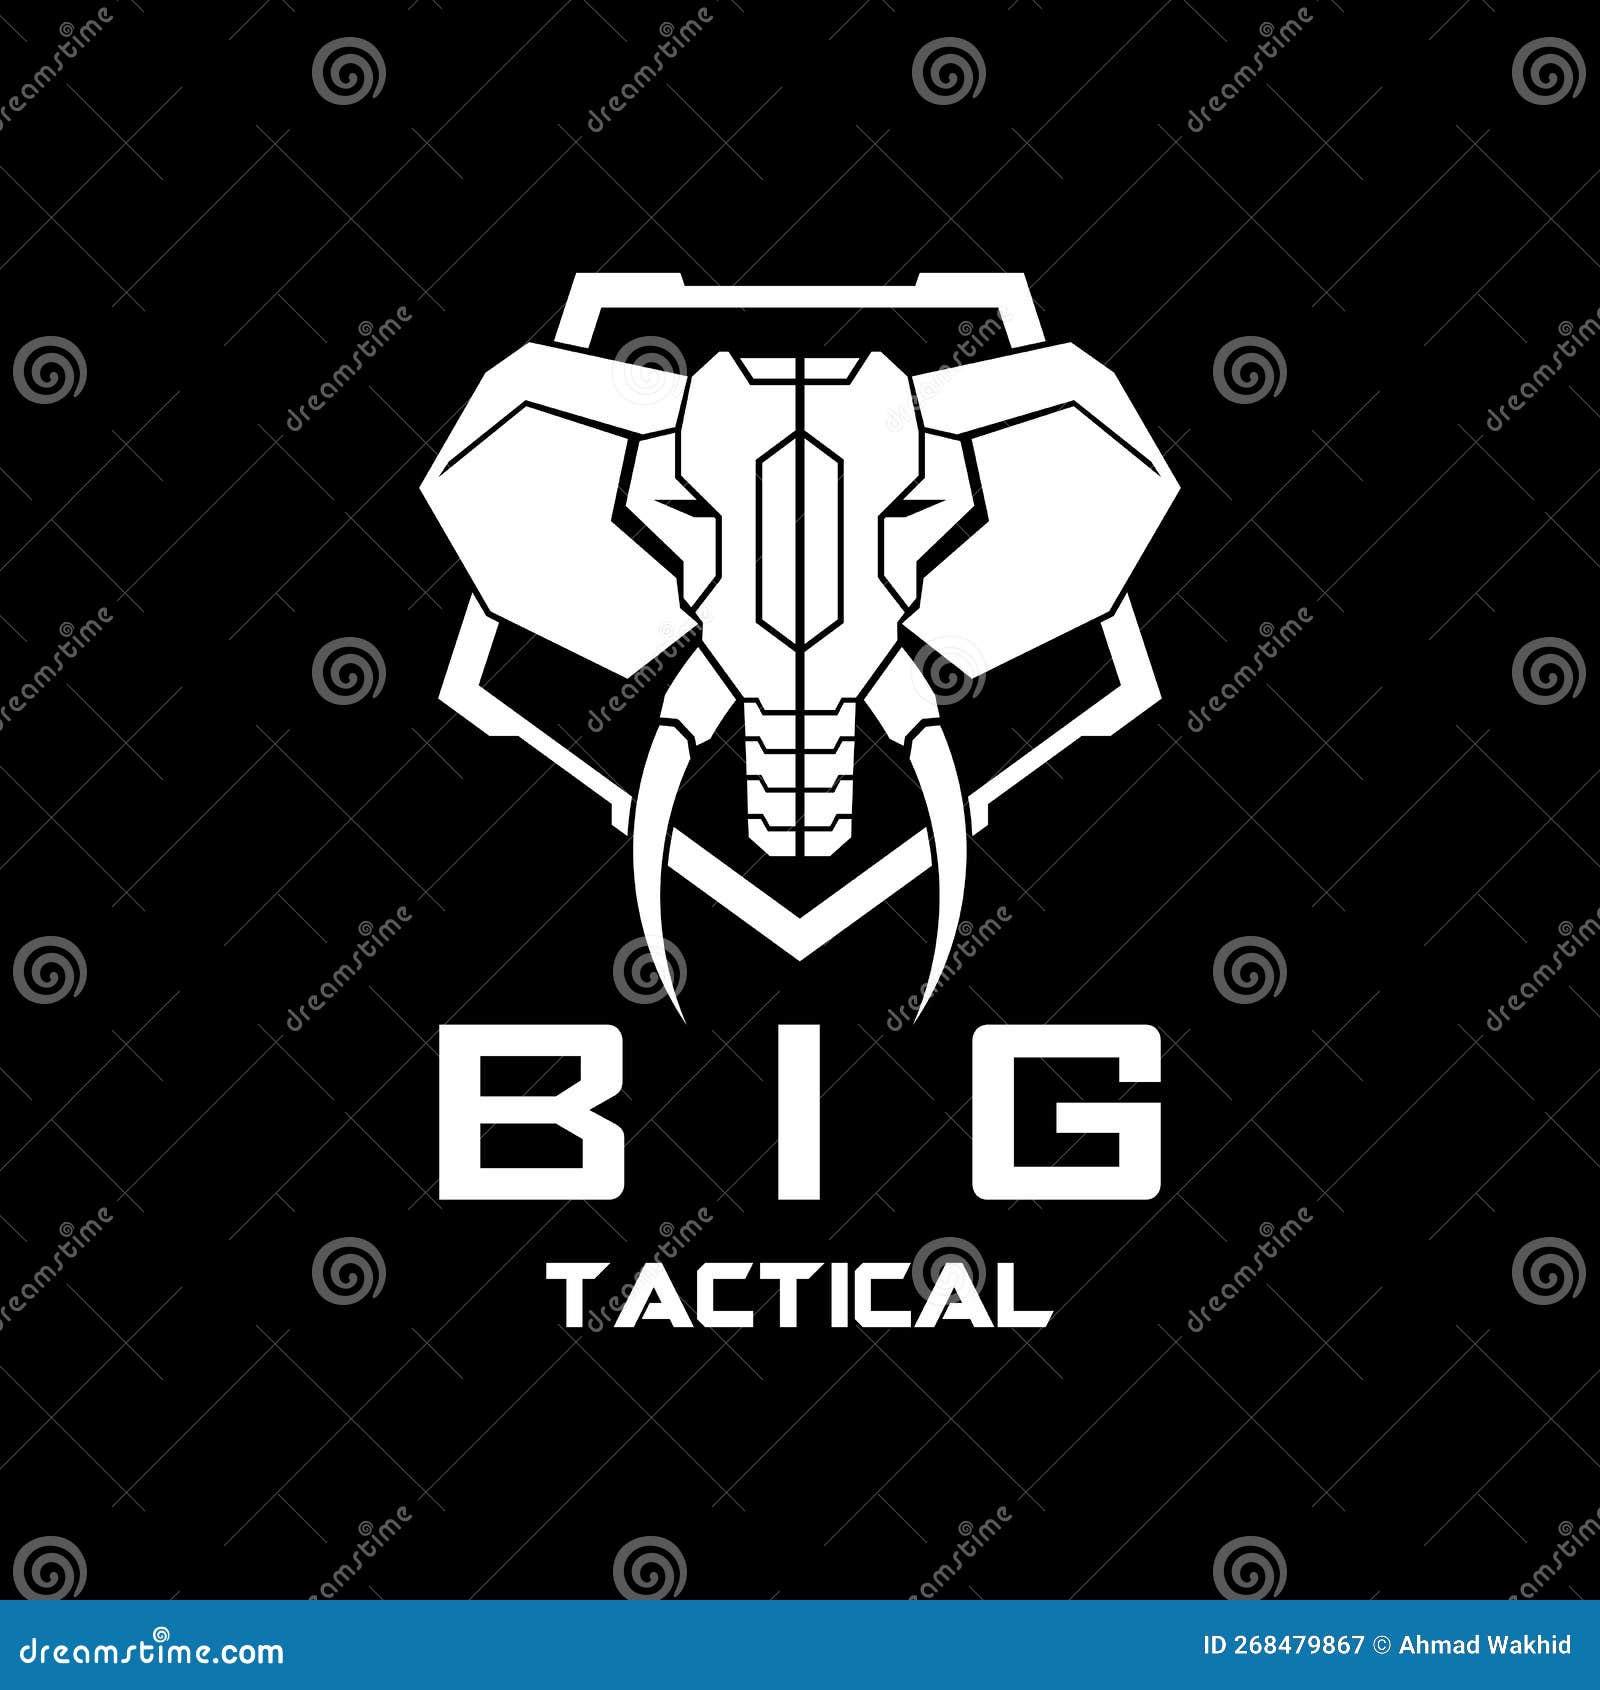 Black and White Elephant Tactical Logo in Shield Vector Template